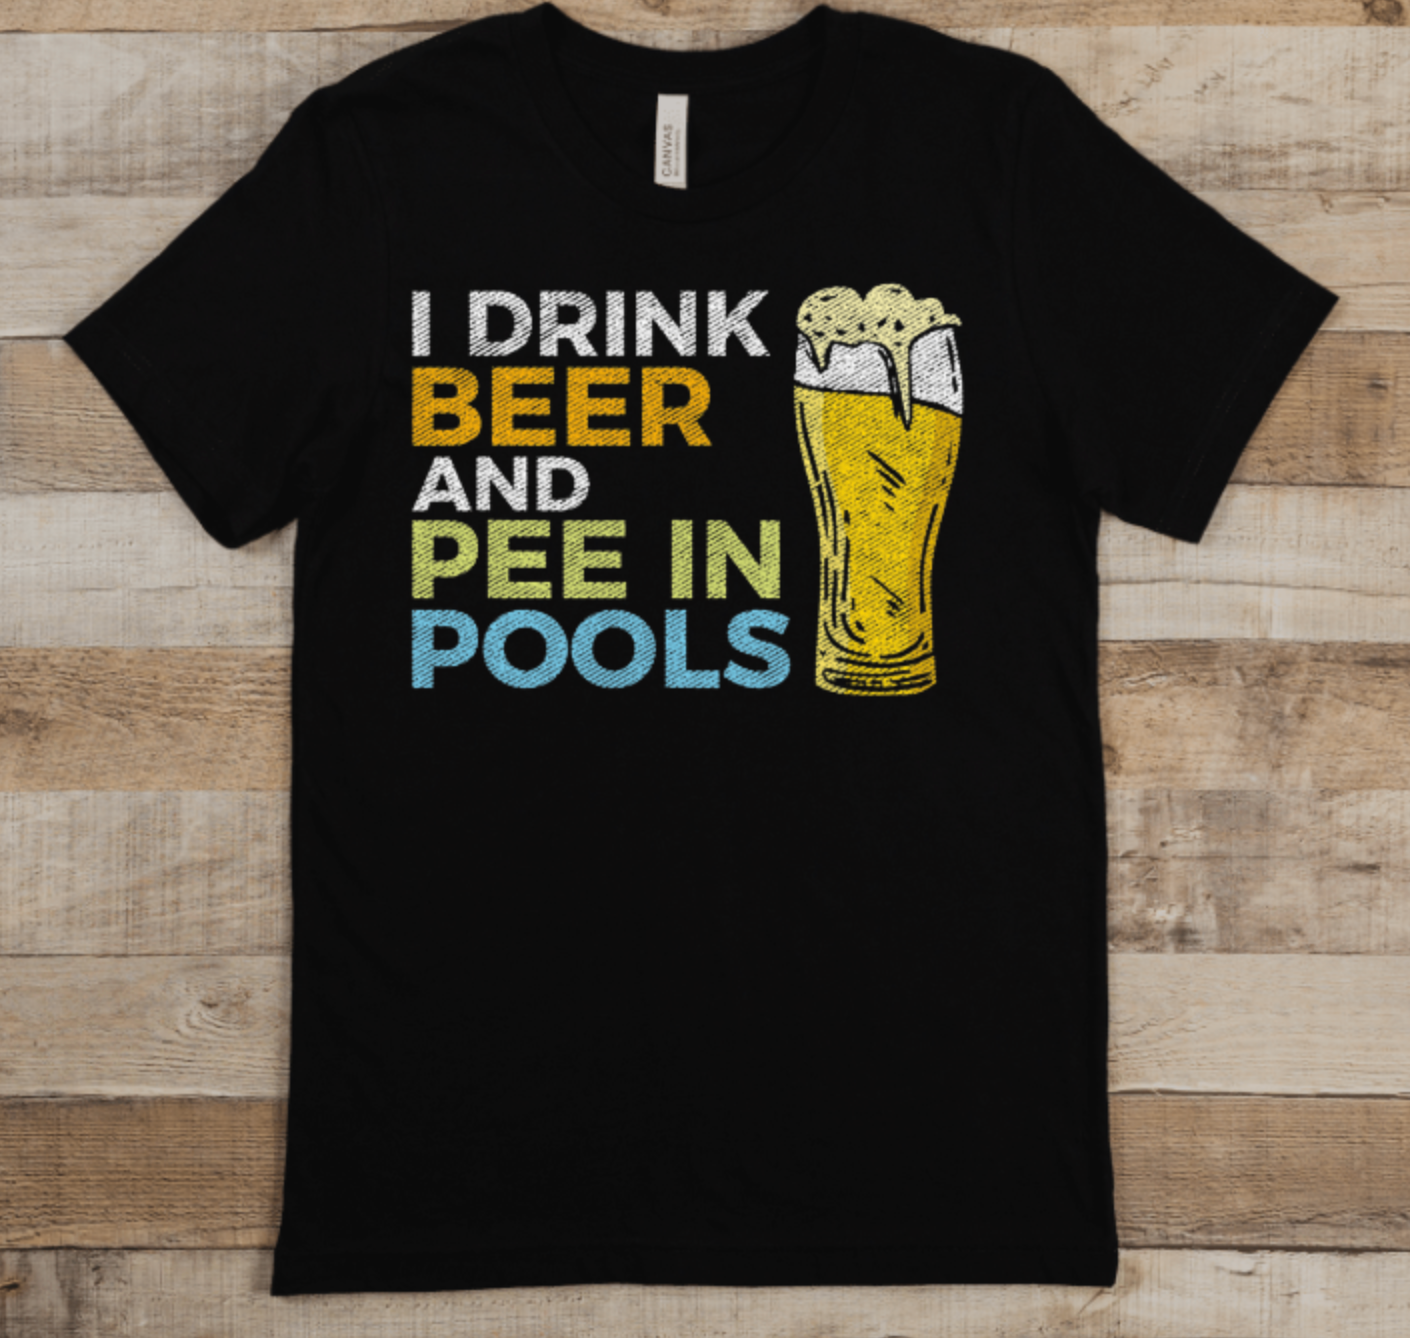 I DRINK BEER AND PEE IN POOLS